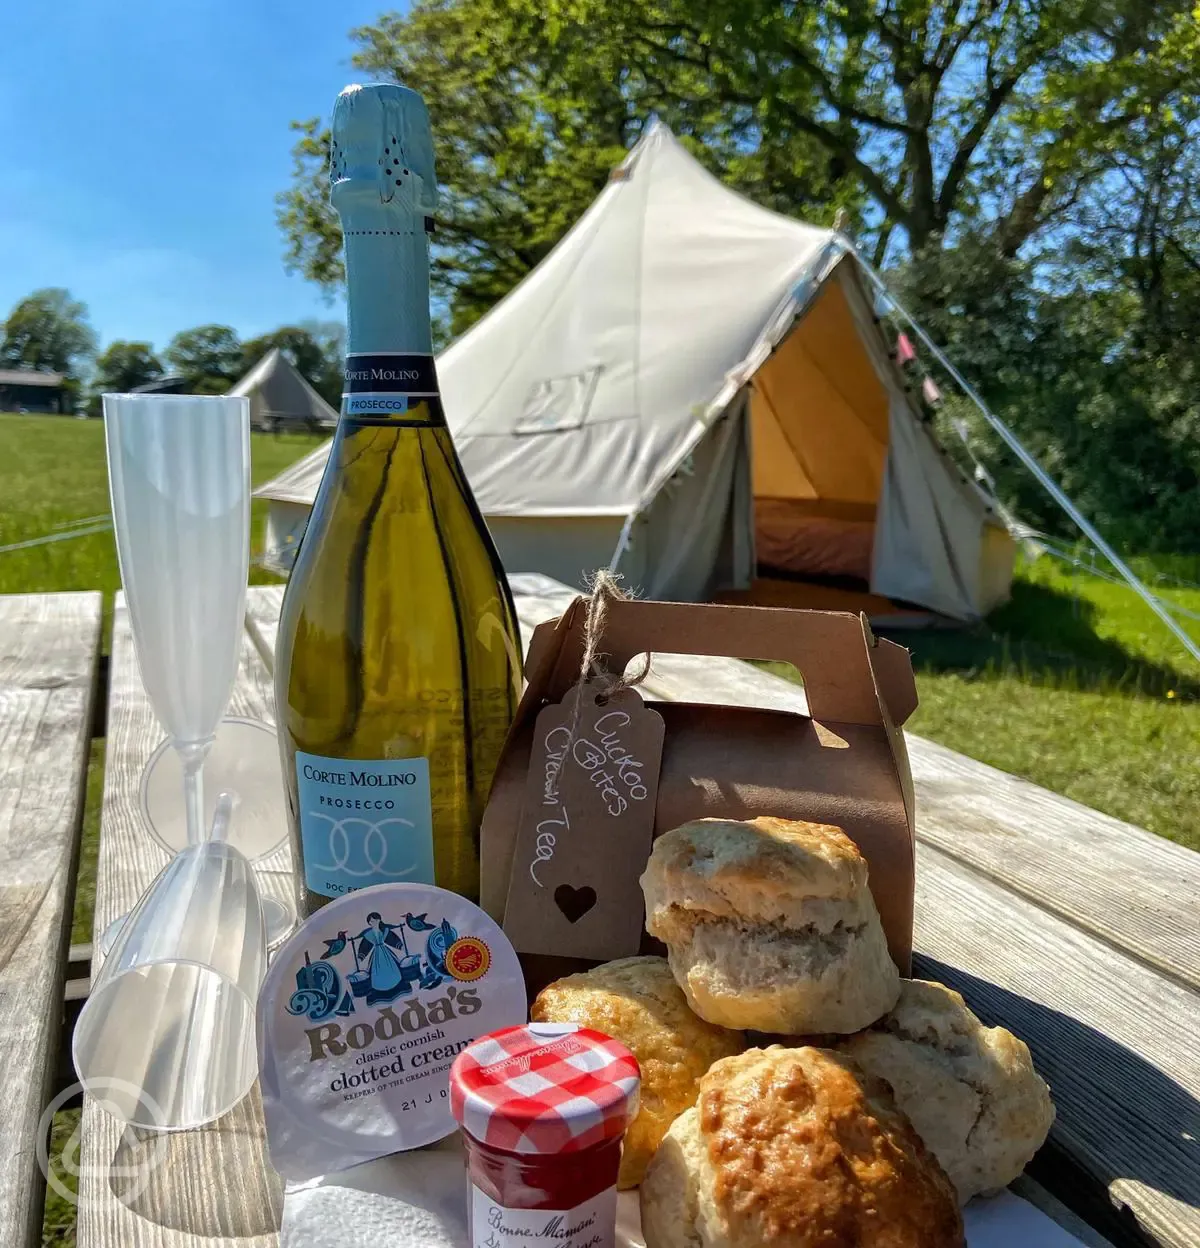 Afternoon tea in a bell tents